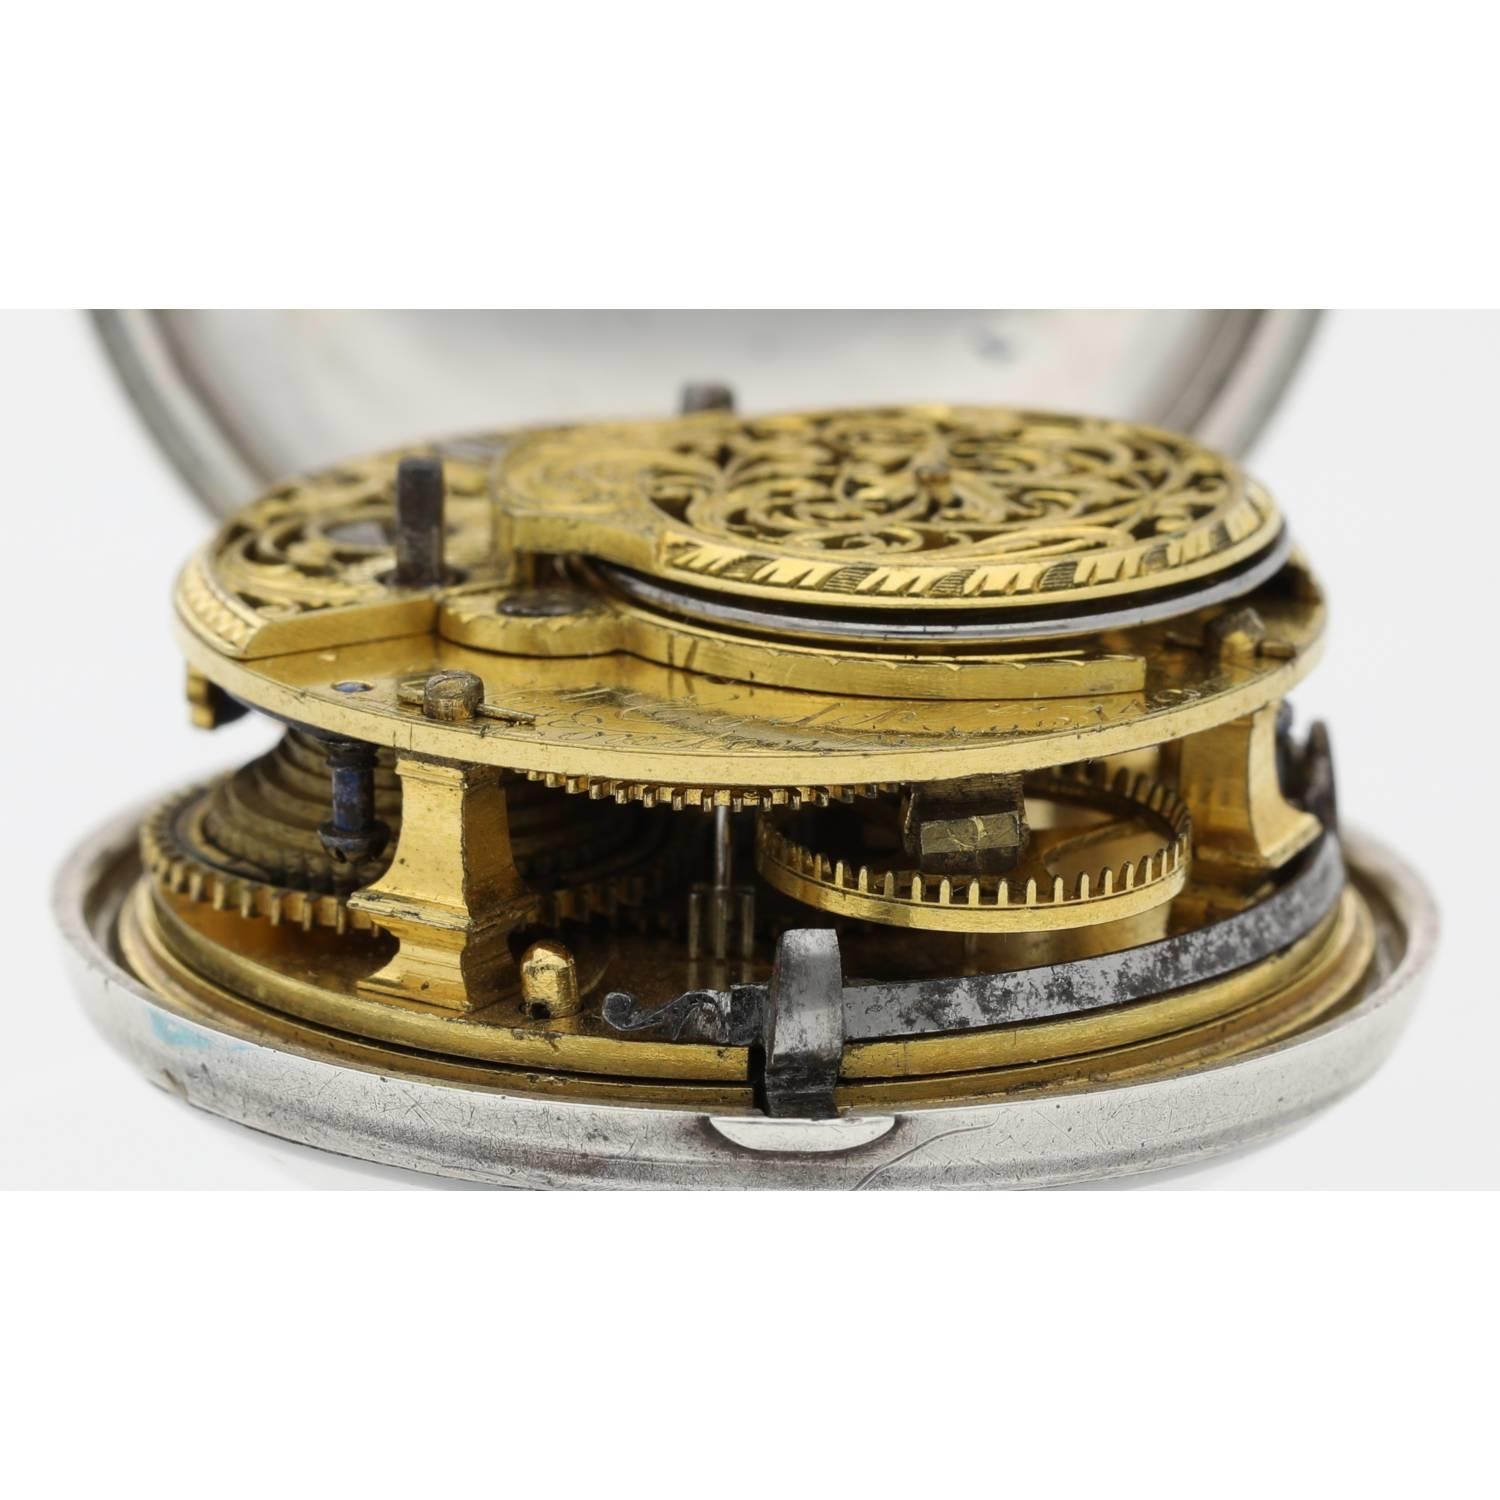 Nath'l Egdch, London - George III silver repoussé pair cased verge pocket watch for the Dutch - Image 6 of 10